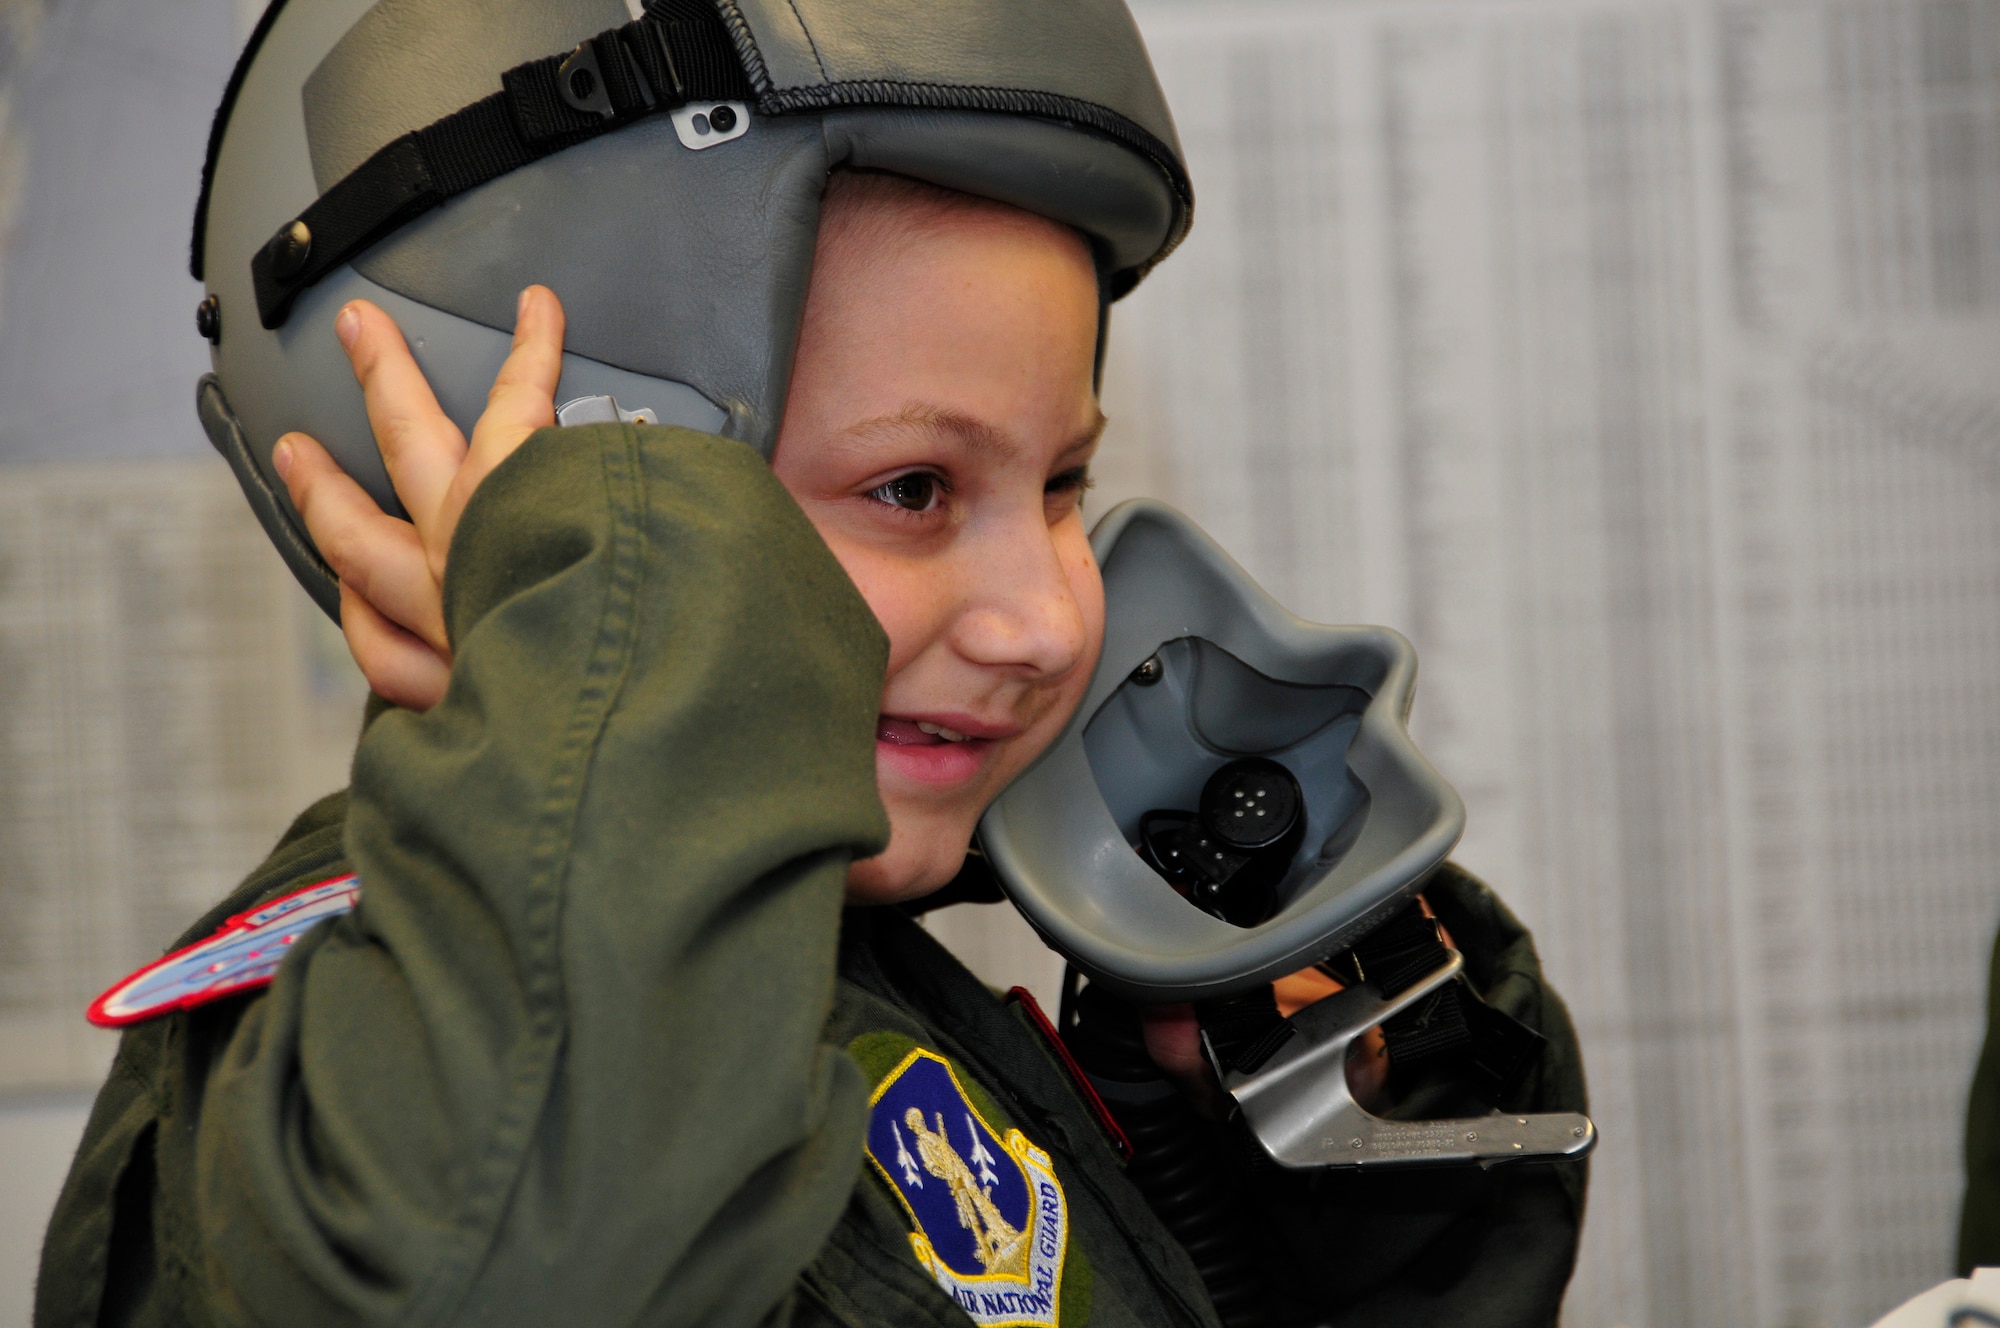 Jacob Kaminski puts on his aircrew gear before his mock LC-130 mission. Jacob, 9, came to the base Oct. 6 to fulfill his dream of being a soldier for a day. After spending the day with the Army, he came to the base to see what it was like to be a pilot with the 109th Airlift Wing. Jacob has been diagnosed with leukemia. (U.S. Air Force photo by Master Sgt. Willie Gizara)